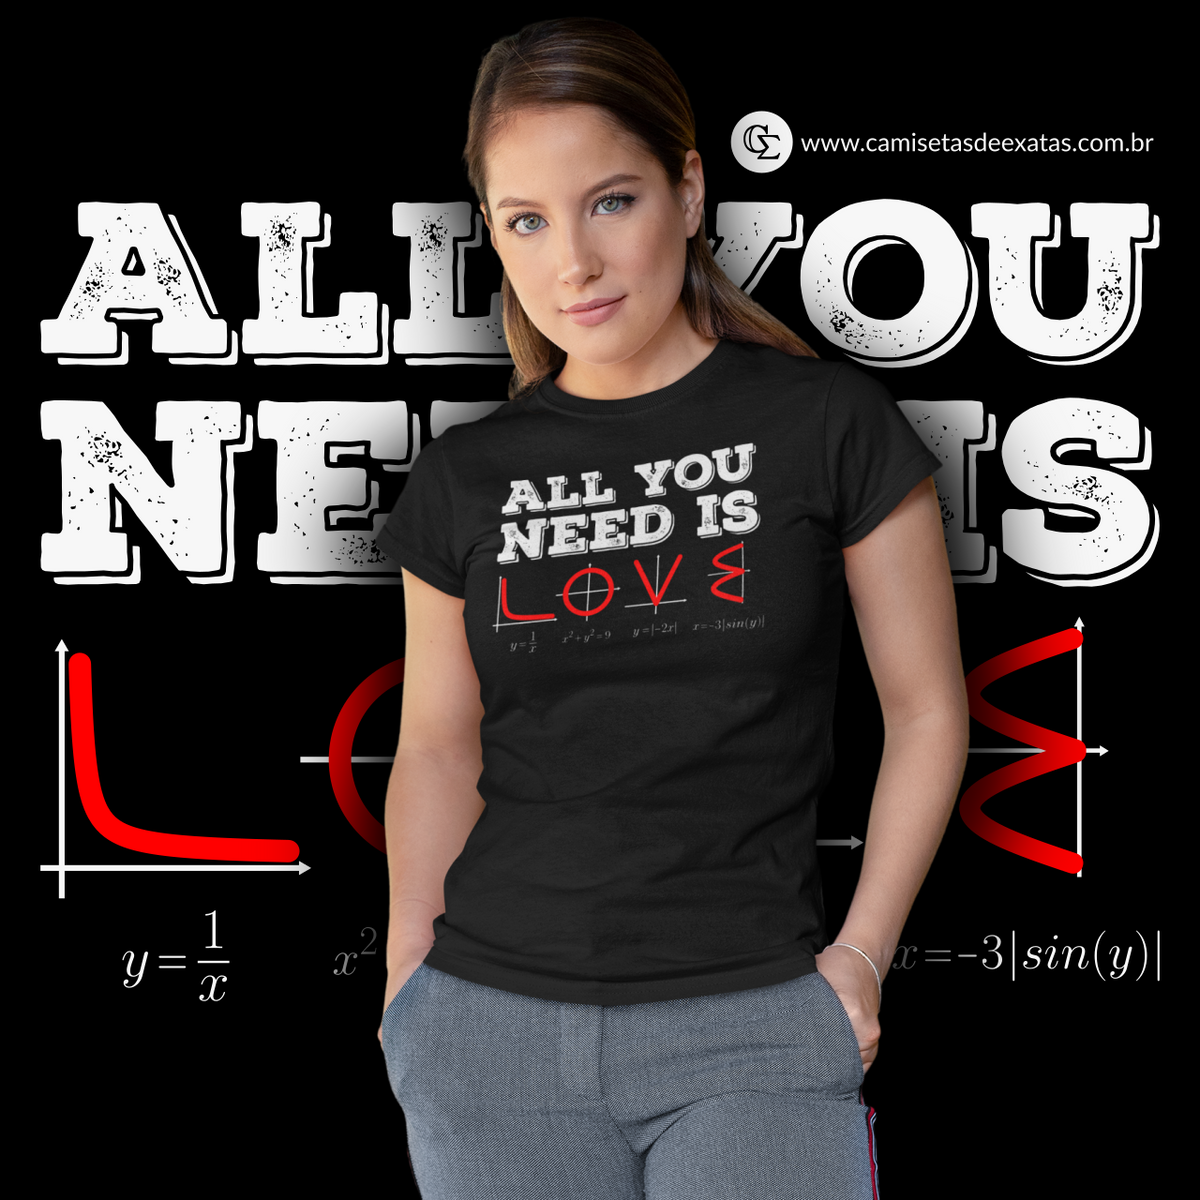 Nome do produto: ALL YOU NEED IS LOVE [3] [BABY LONG]